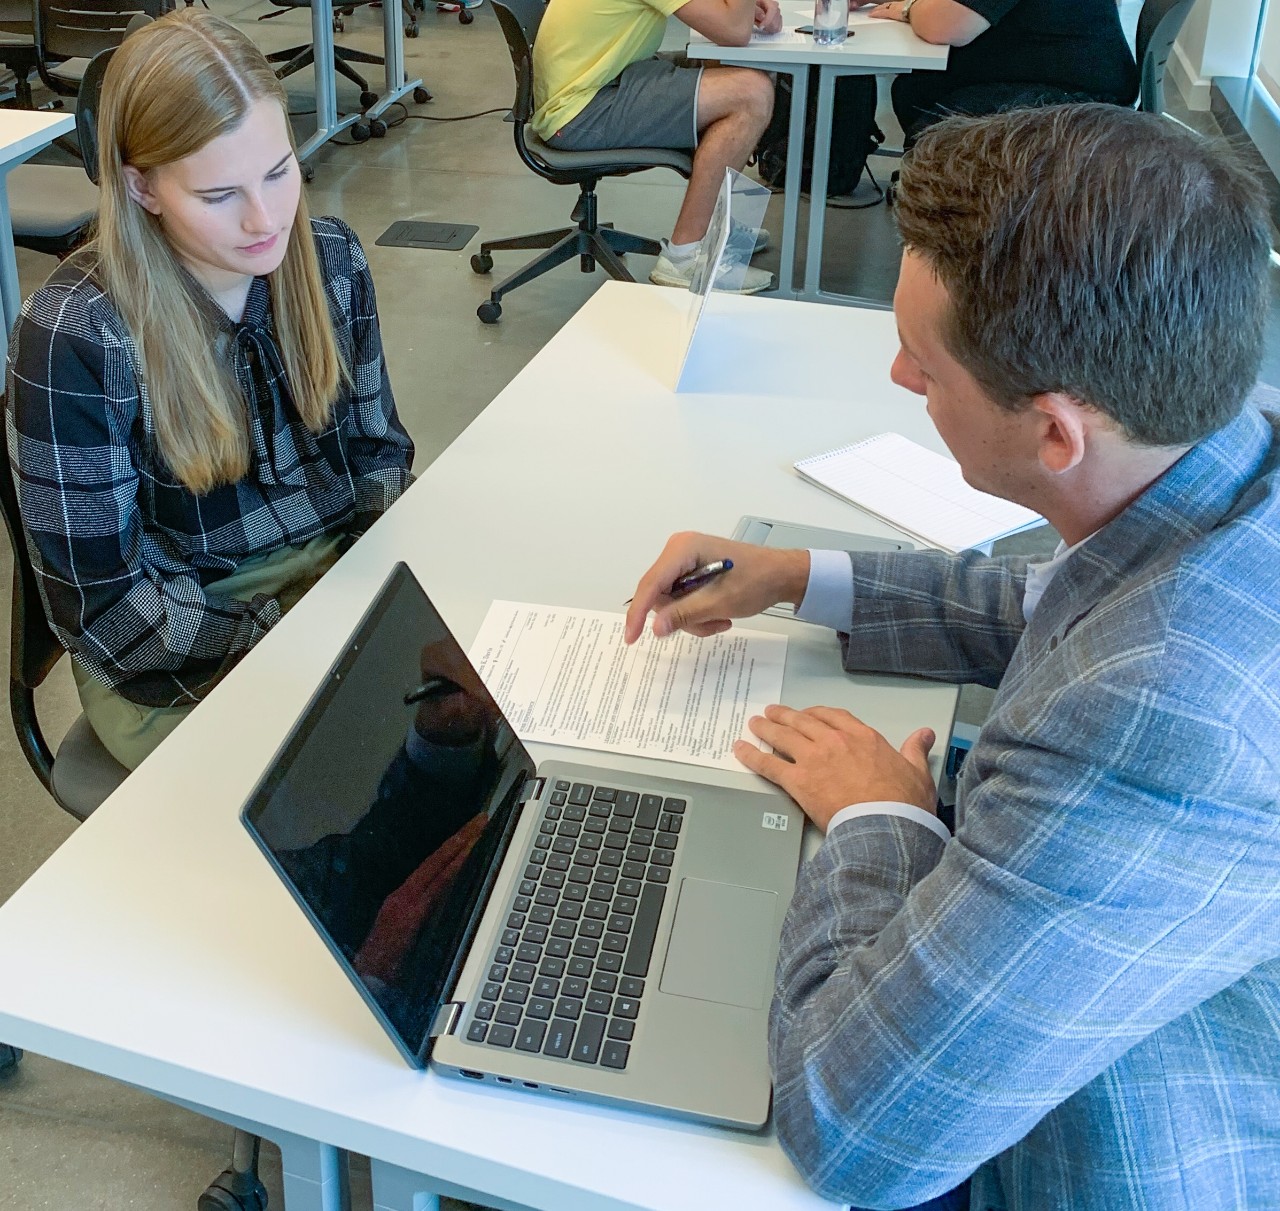 Career services staff member reviews student's resume with female student in Lindner Hall classroom